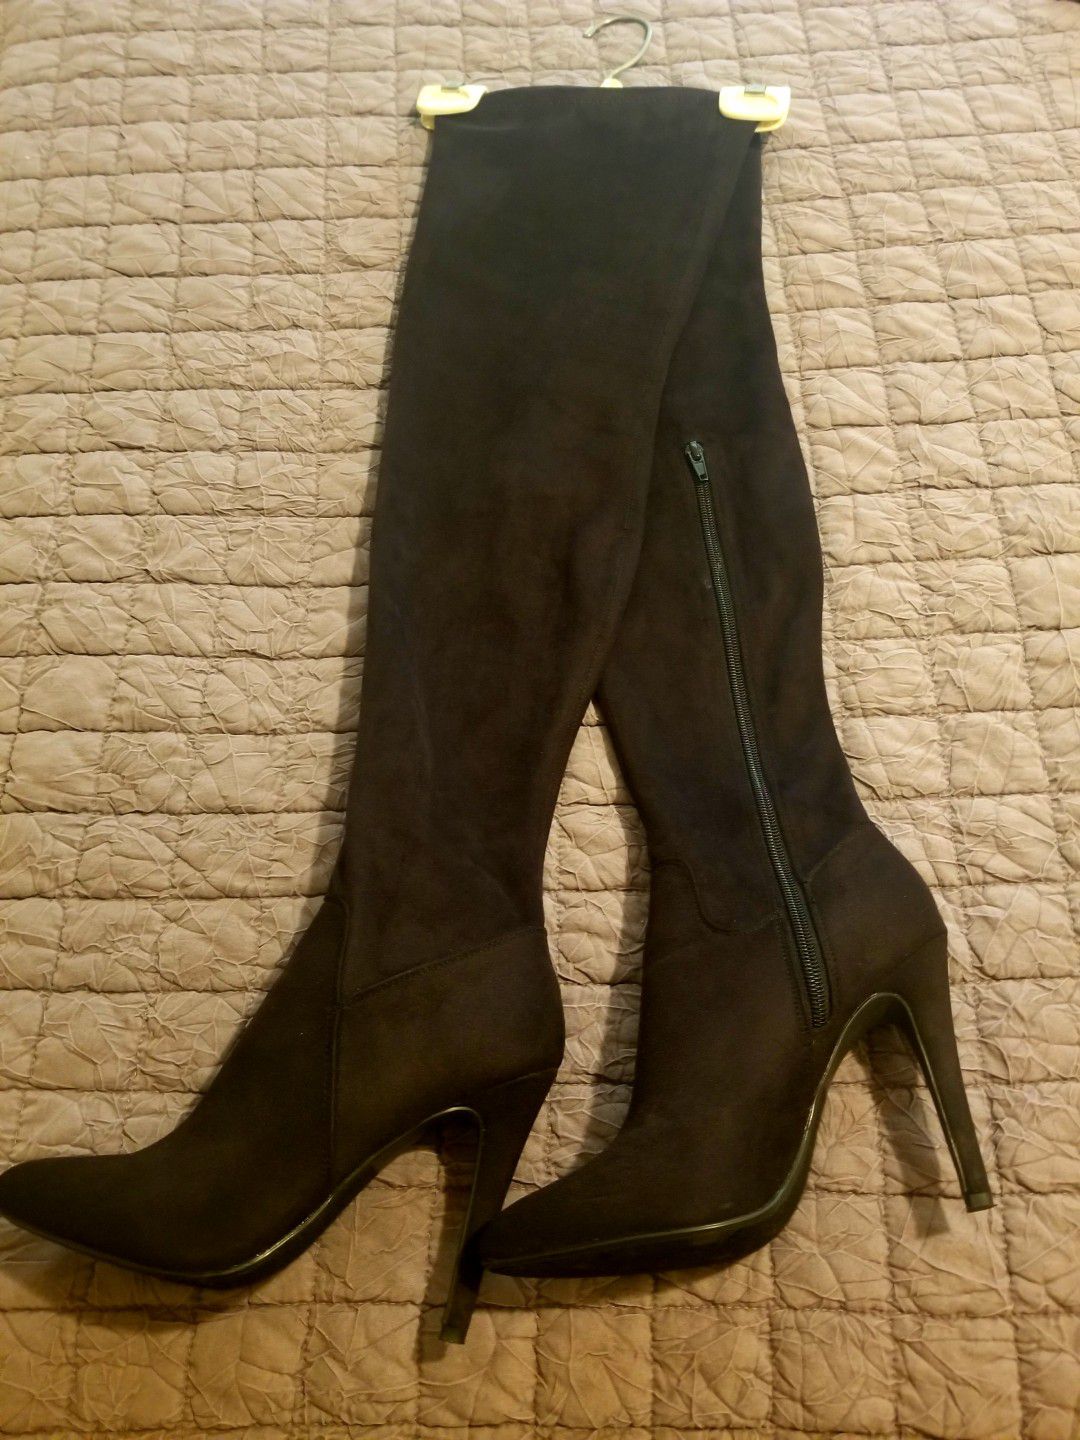 Black Suede-Tall boots. In great condition! Size (7)